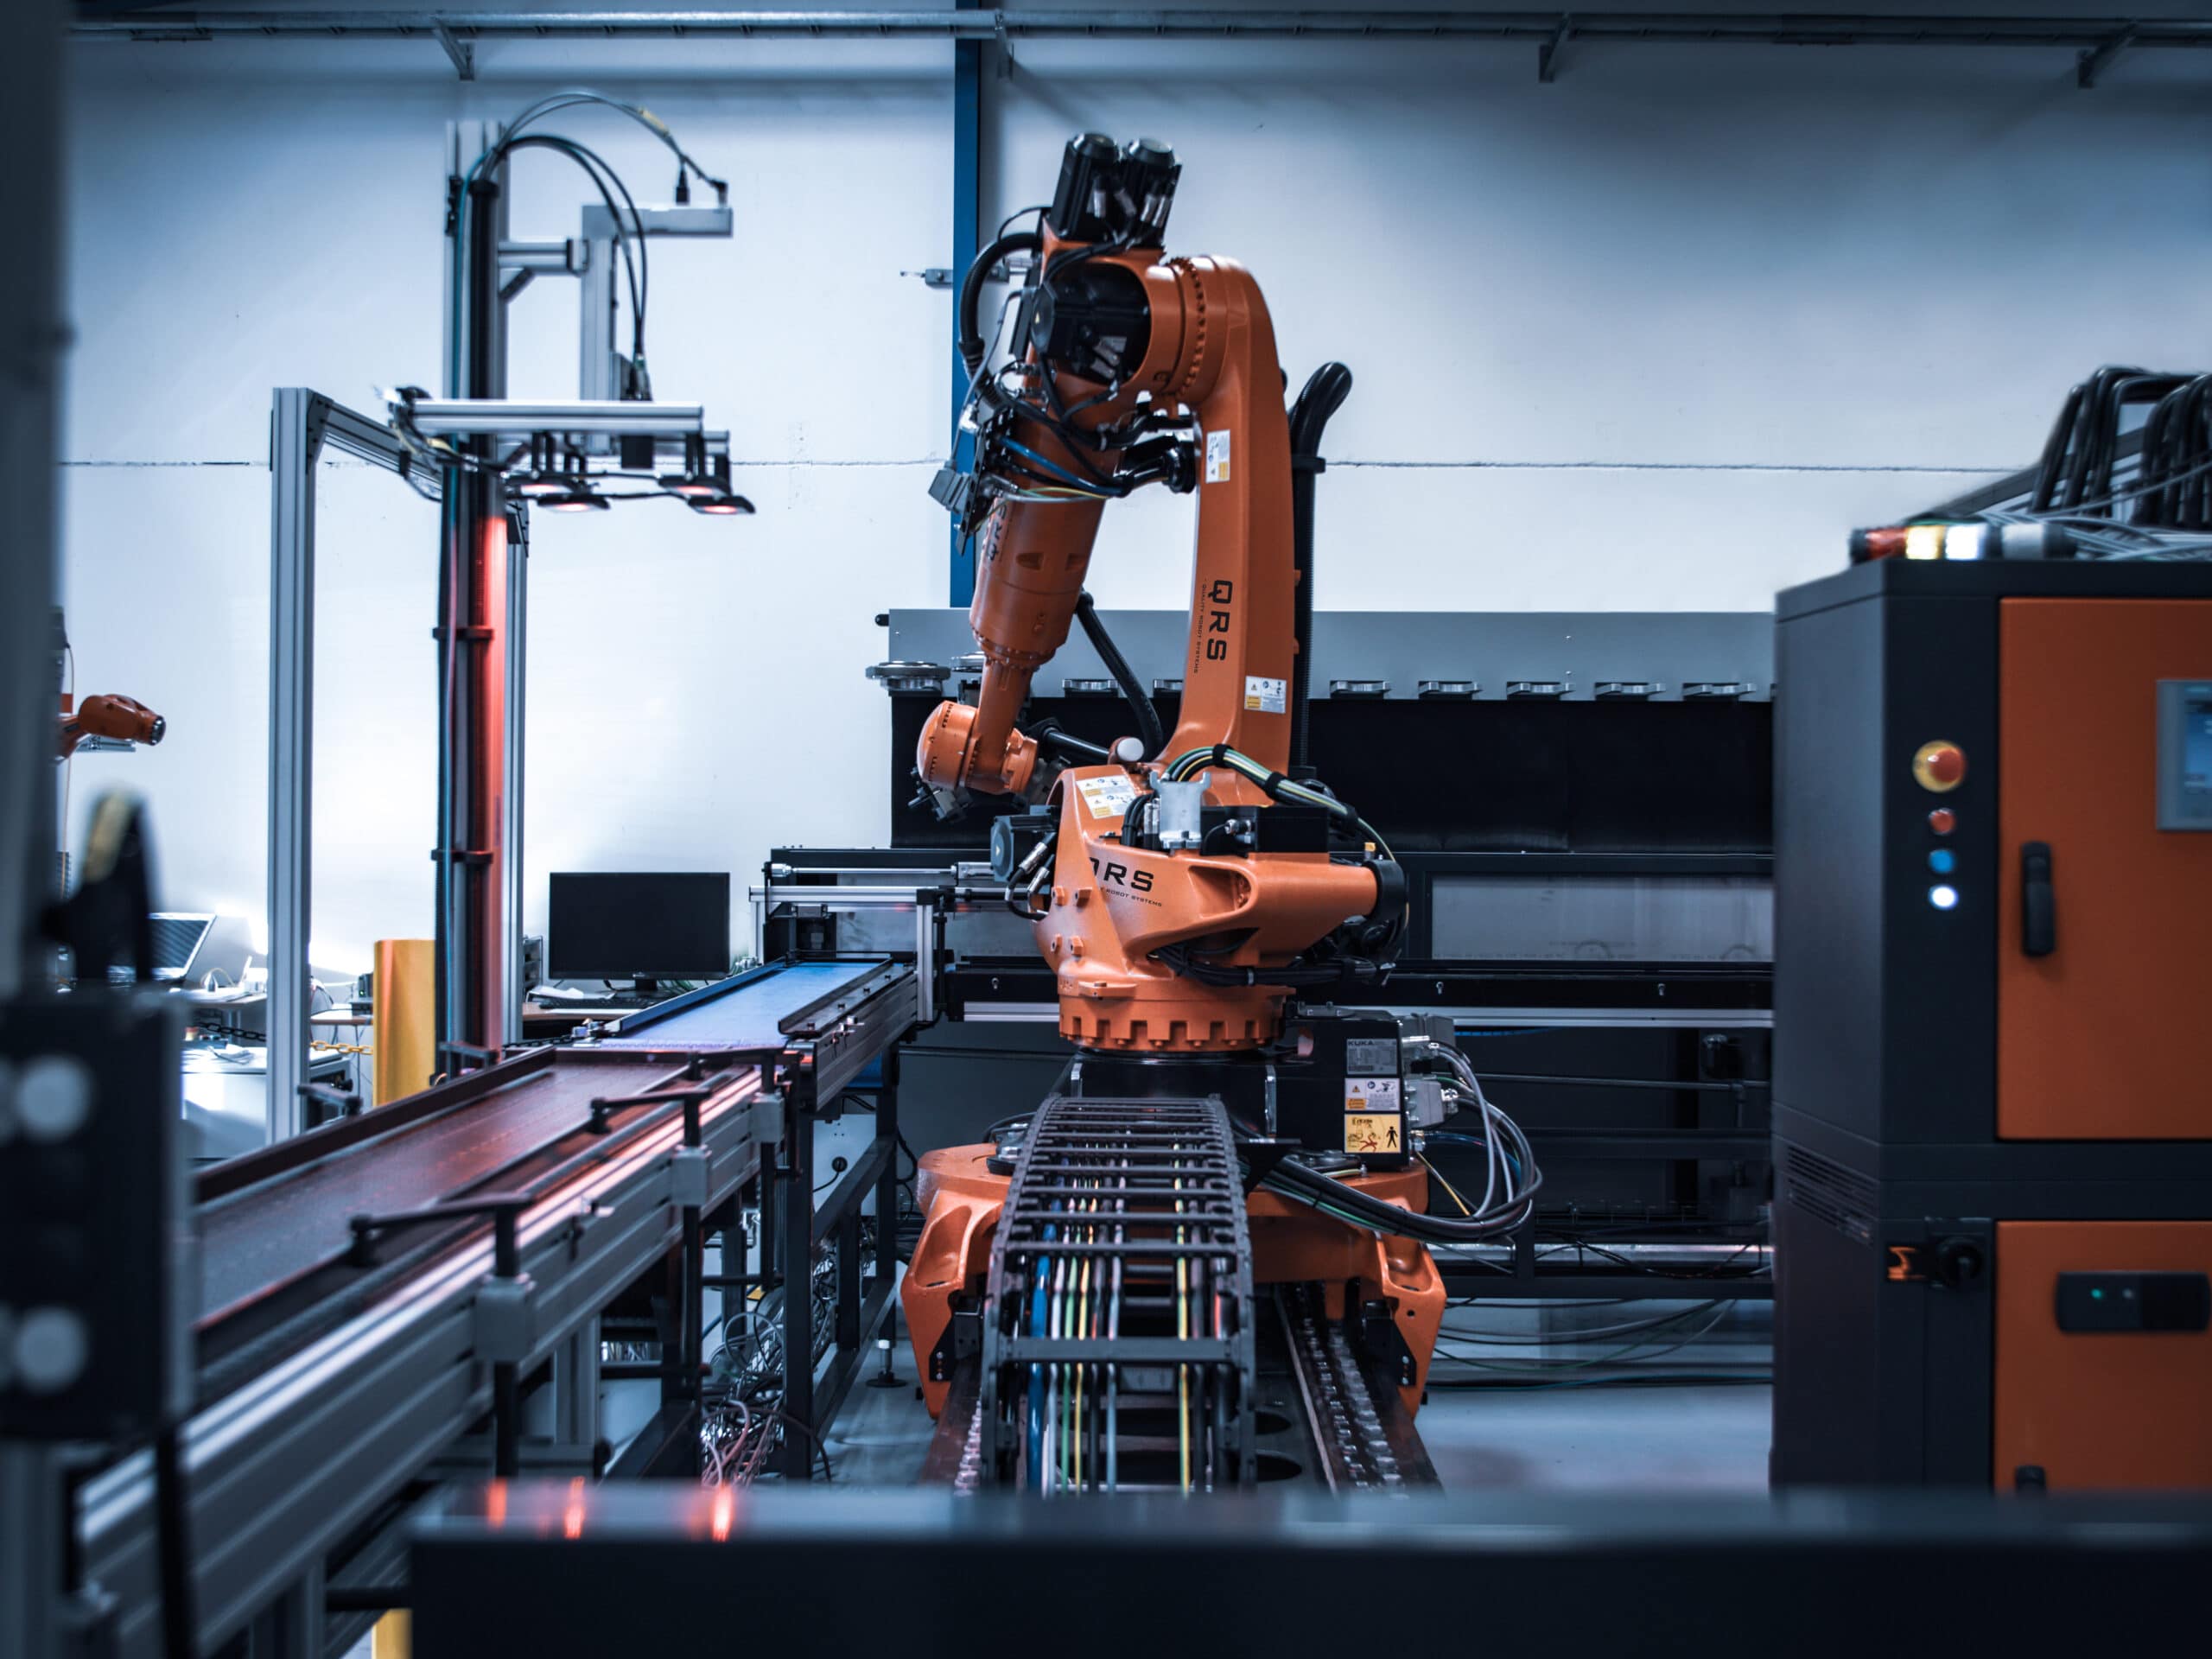 Orange Kuka robot on a track in a robotic automated production plant